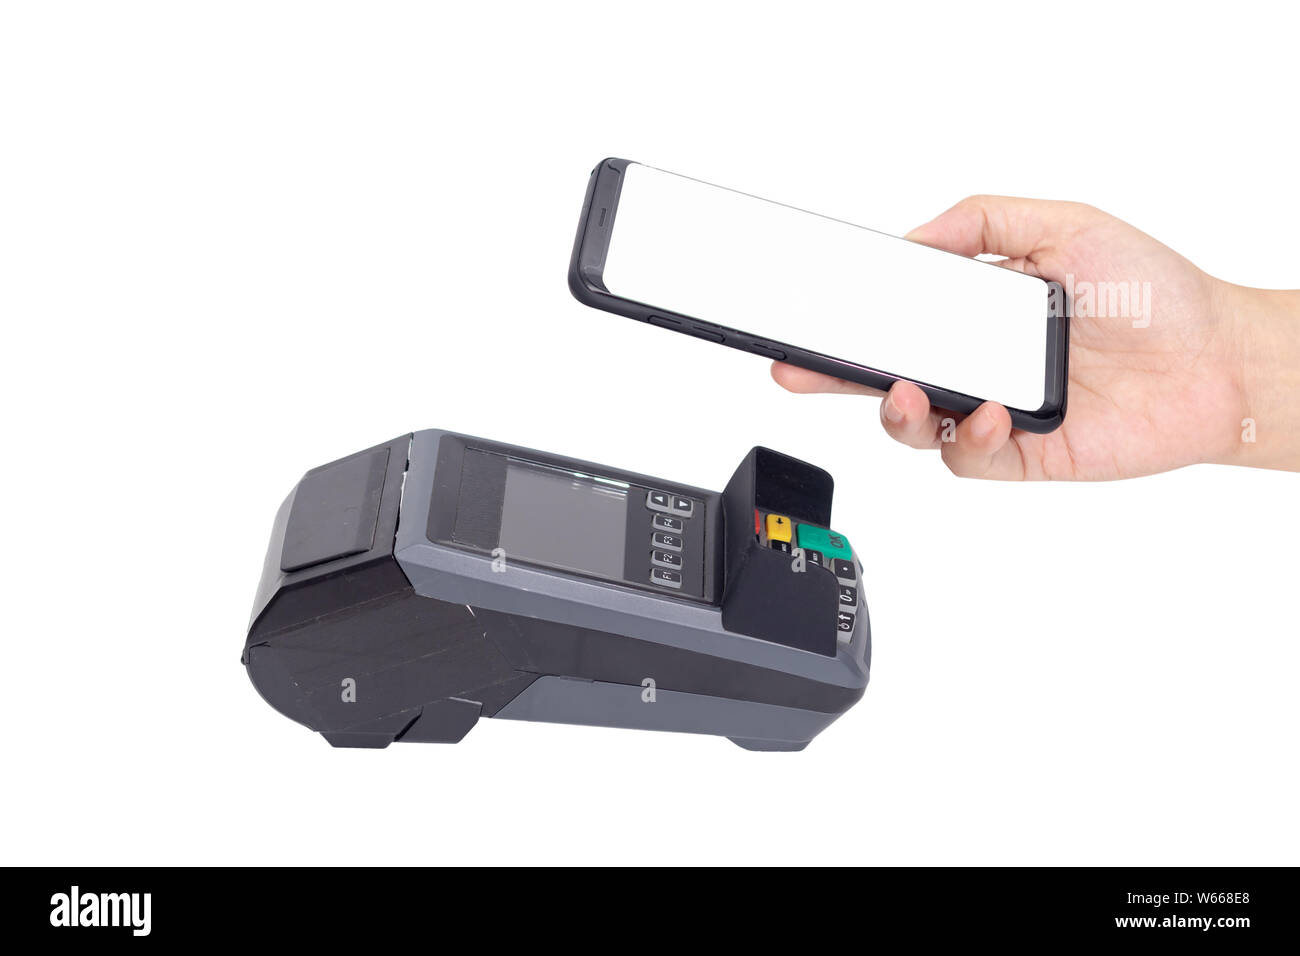 cashless Society, customer paying bill through smartphone using NFC technology at point of sale terminal with clipping path. contactless by mobile dig Stock Photo